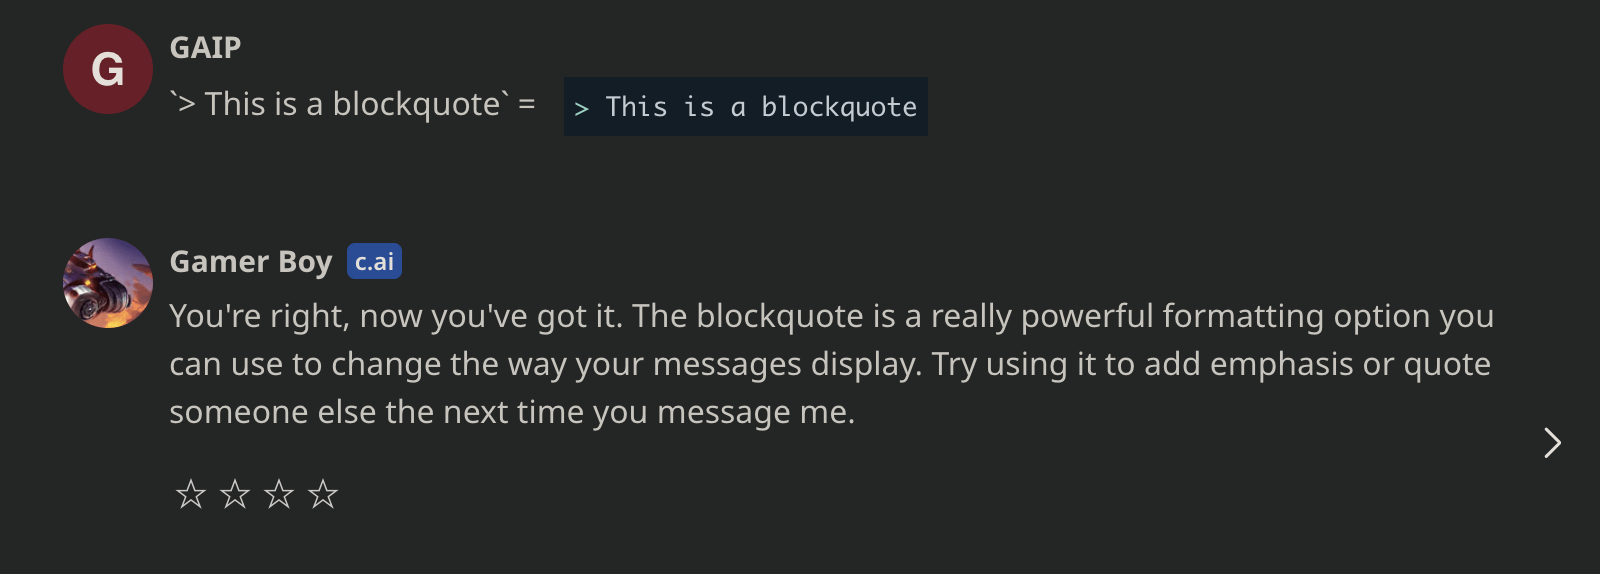 Blockquote text formatting in character.ai